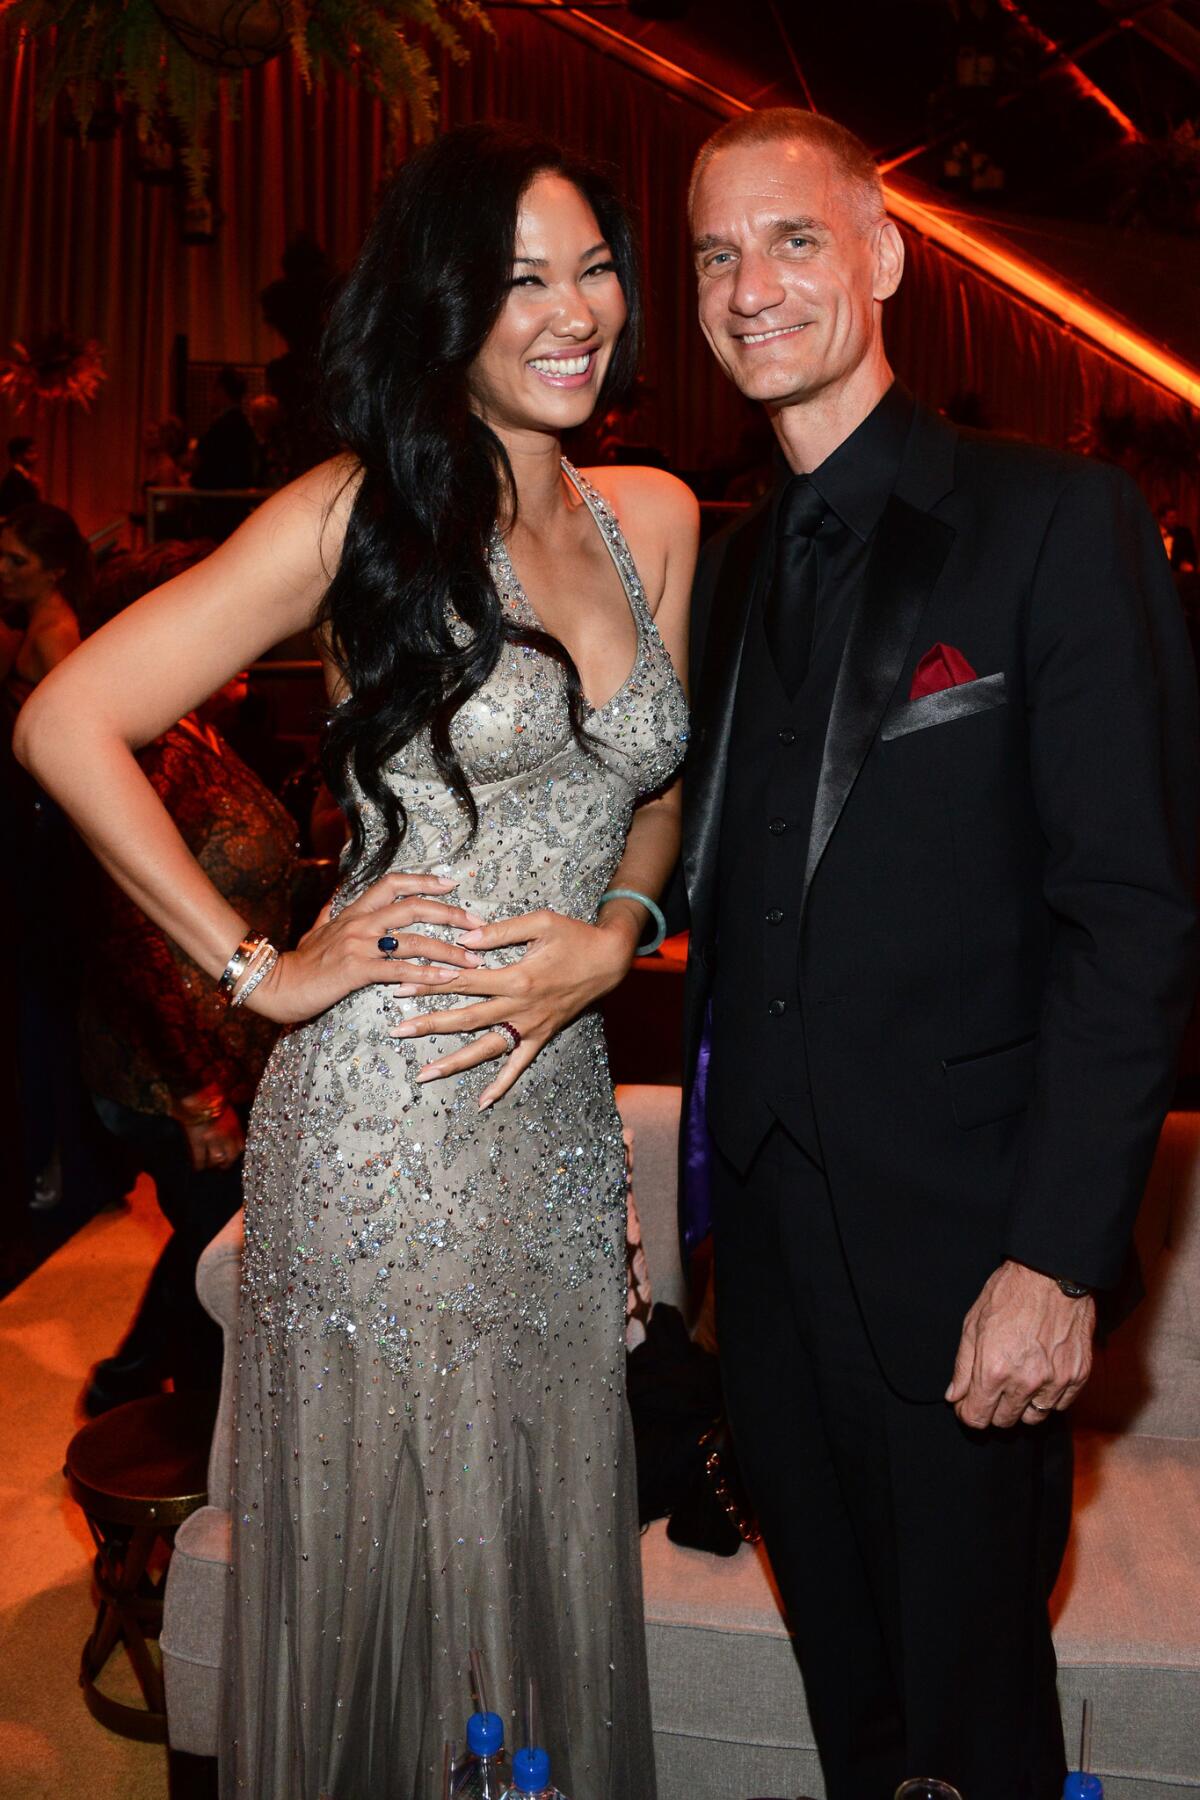 Kimora Lee Simmons and husband Tim Leissner have welcomed their first child together, son Wolfe Lee Leissner.